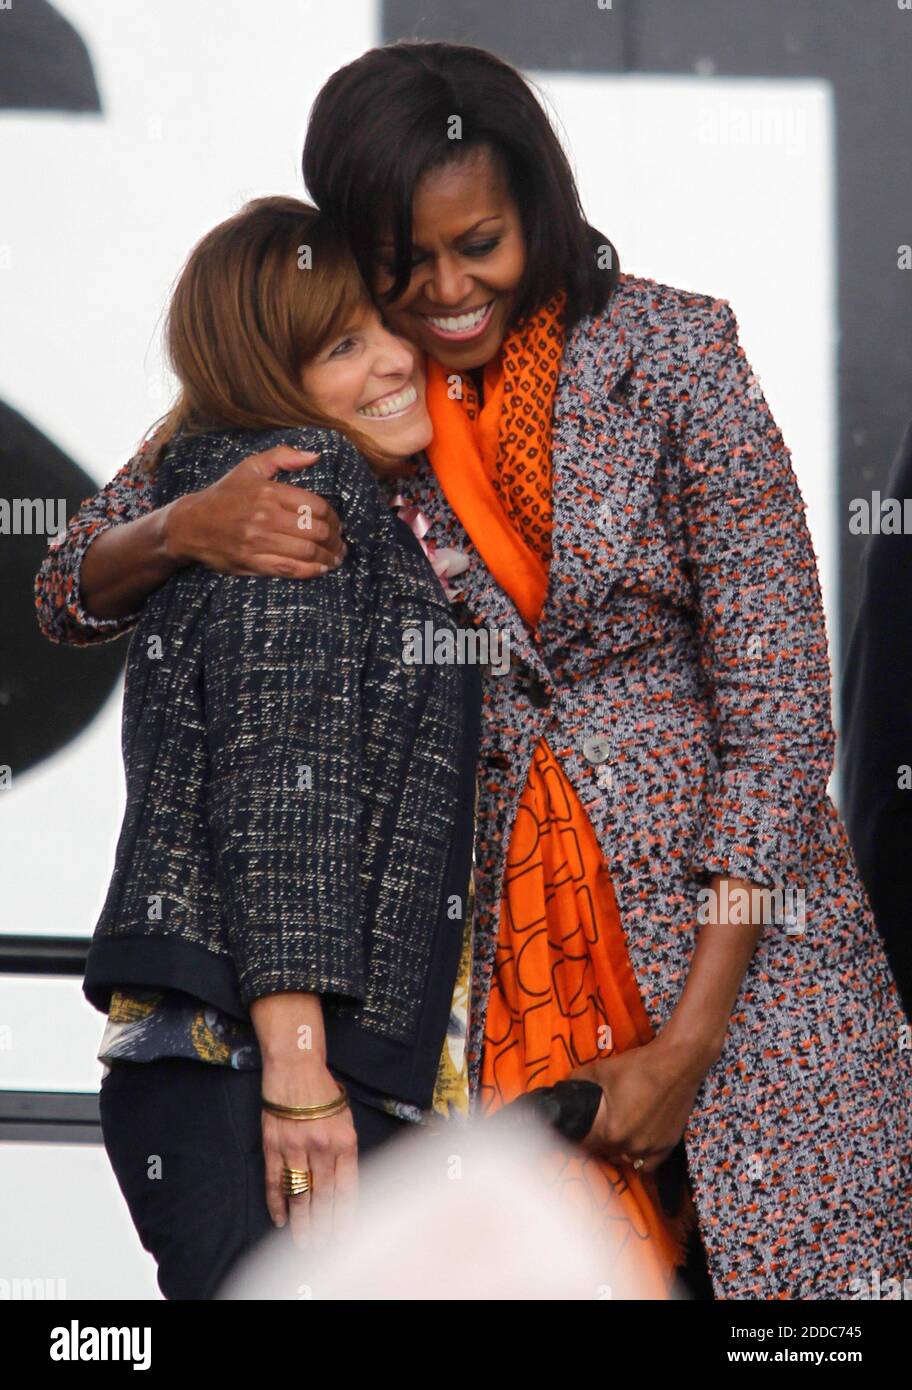 NO FILM, NO VIDEO, NO TV, NO DOCUMENTARY - First lady Michelle Obama gives Melinda Cook, a descendant of Dorothy Stratton, a hug during a ceremony for the Coast Guard Cutter Stratton on Coast Guard Island in Alameda, CA, USA ON March 31, 2012. The first lady made the trip to California to join in the commissioning ceremony placing the ship into active service. Mrs. Obama, a sponsor of the Cutter Stratton, helped christen the ship in Pascagoula, Mississippi, in 2010 by breaking a champagne bottle over the bow. Photo by Anda Chu/Oakland Tribune/MCT/ABACAPRESS.COM Stock Photo